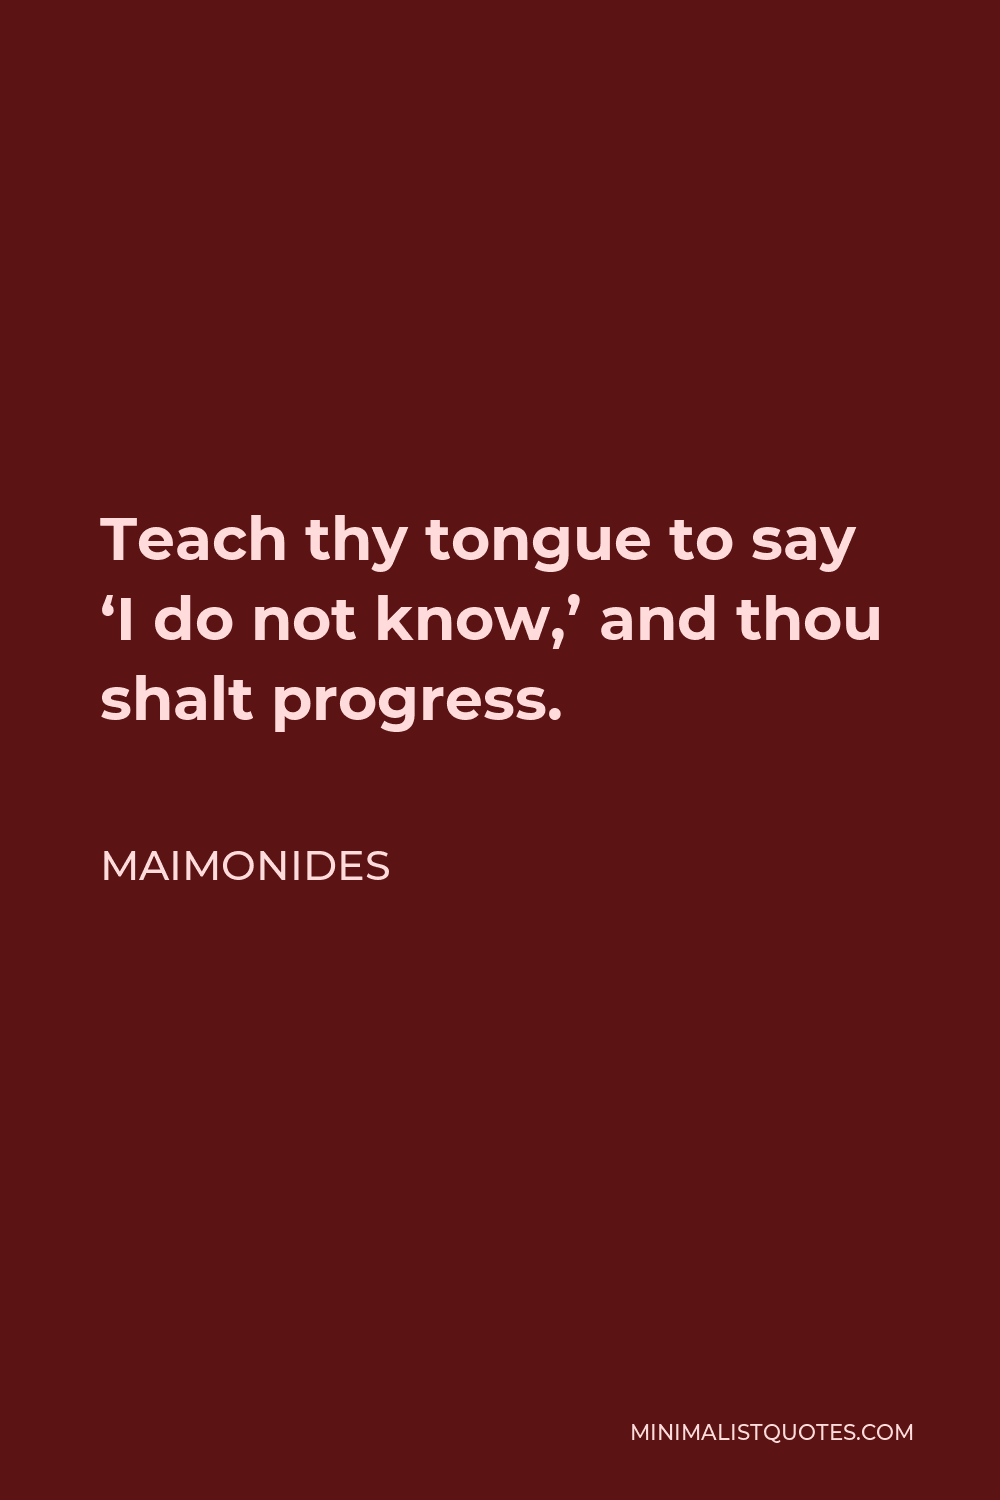 Maimonides Quote: Teach thy tongue to say 'I do not know,' and thou shalt  progress.